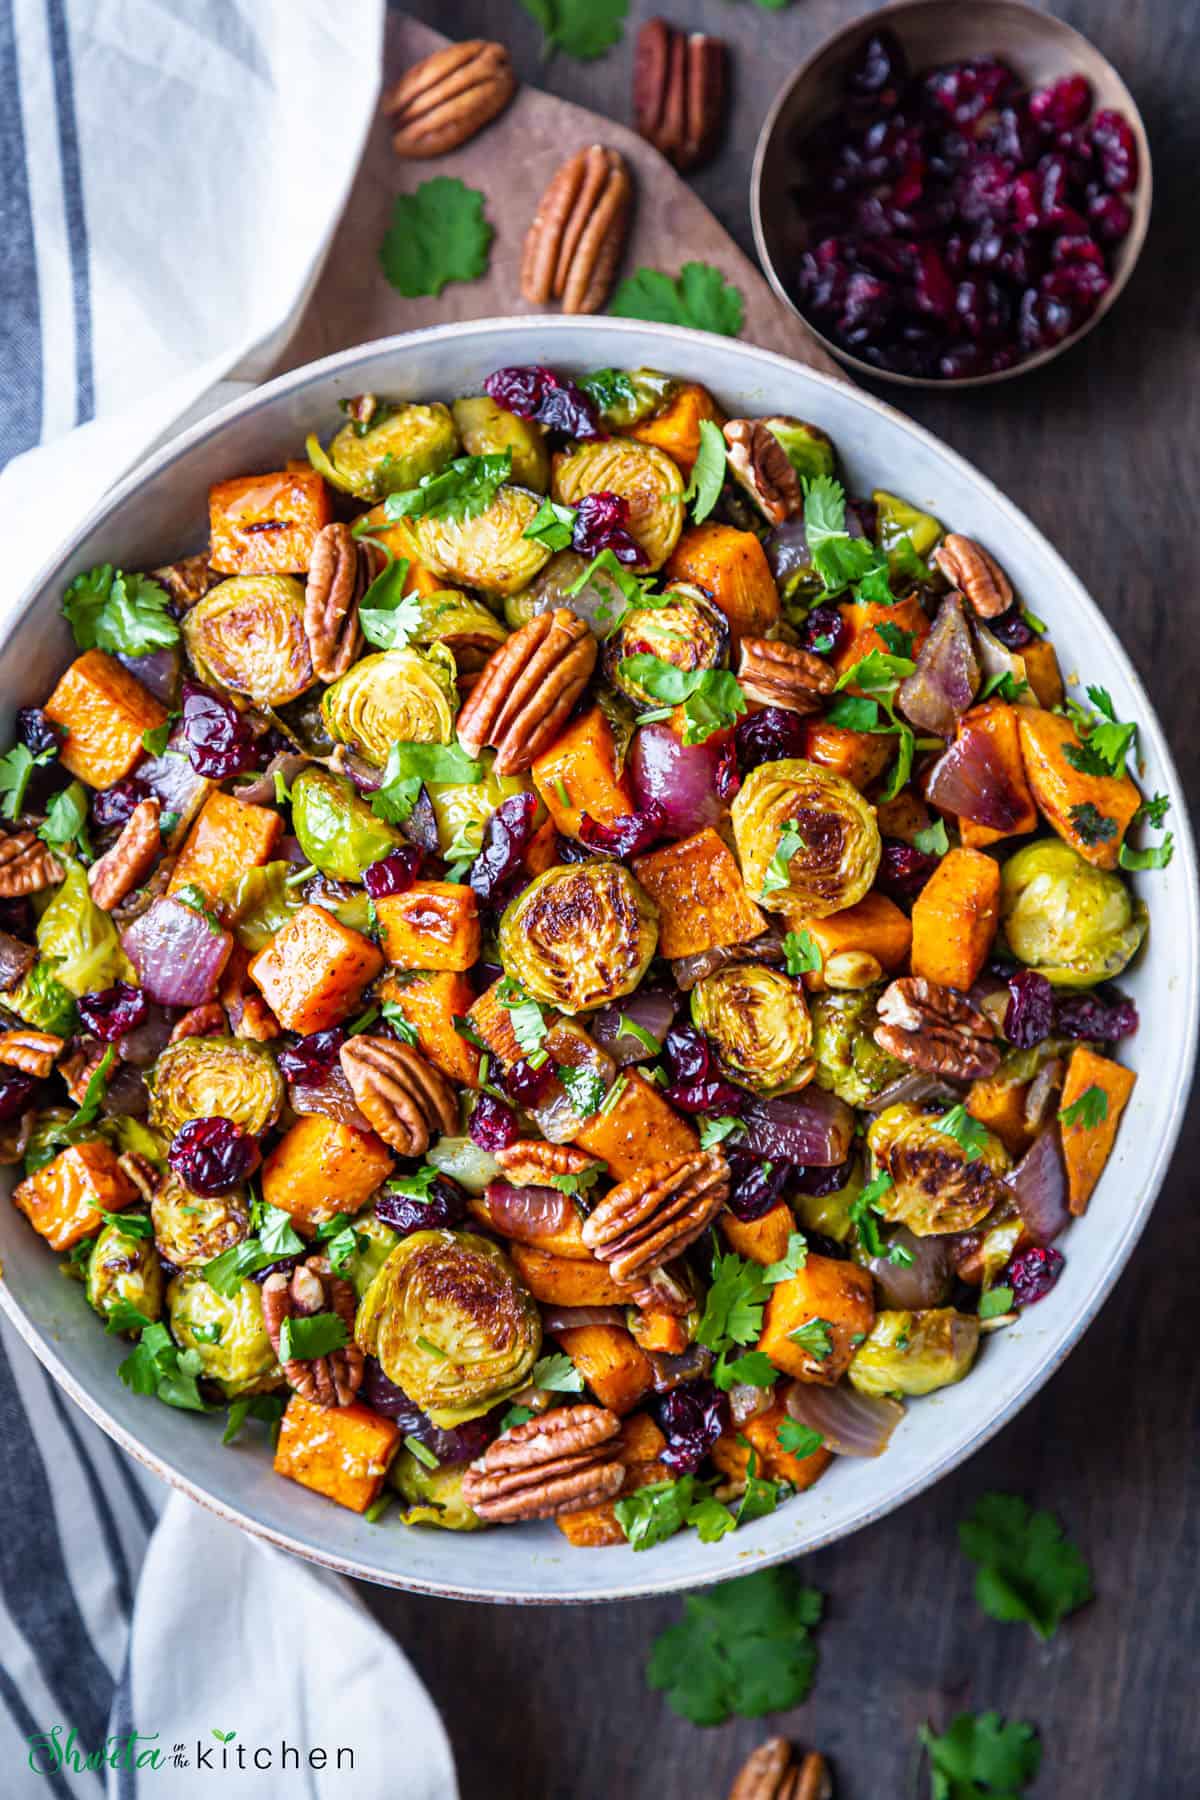 Bowl of roasted brussels sprouts and sweet potatoes with bowl of dried cranberries at side